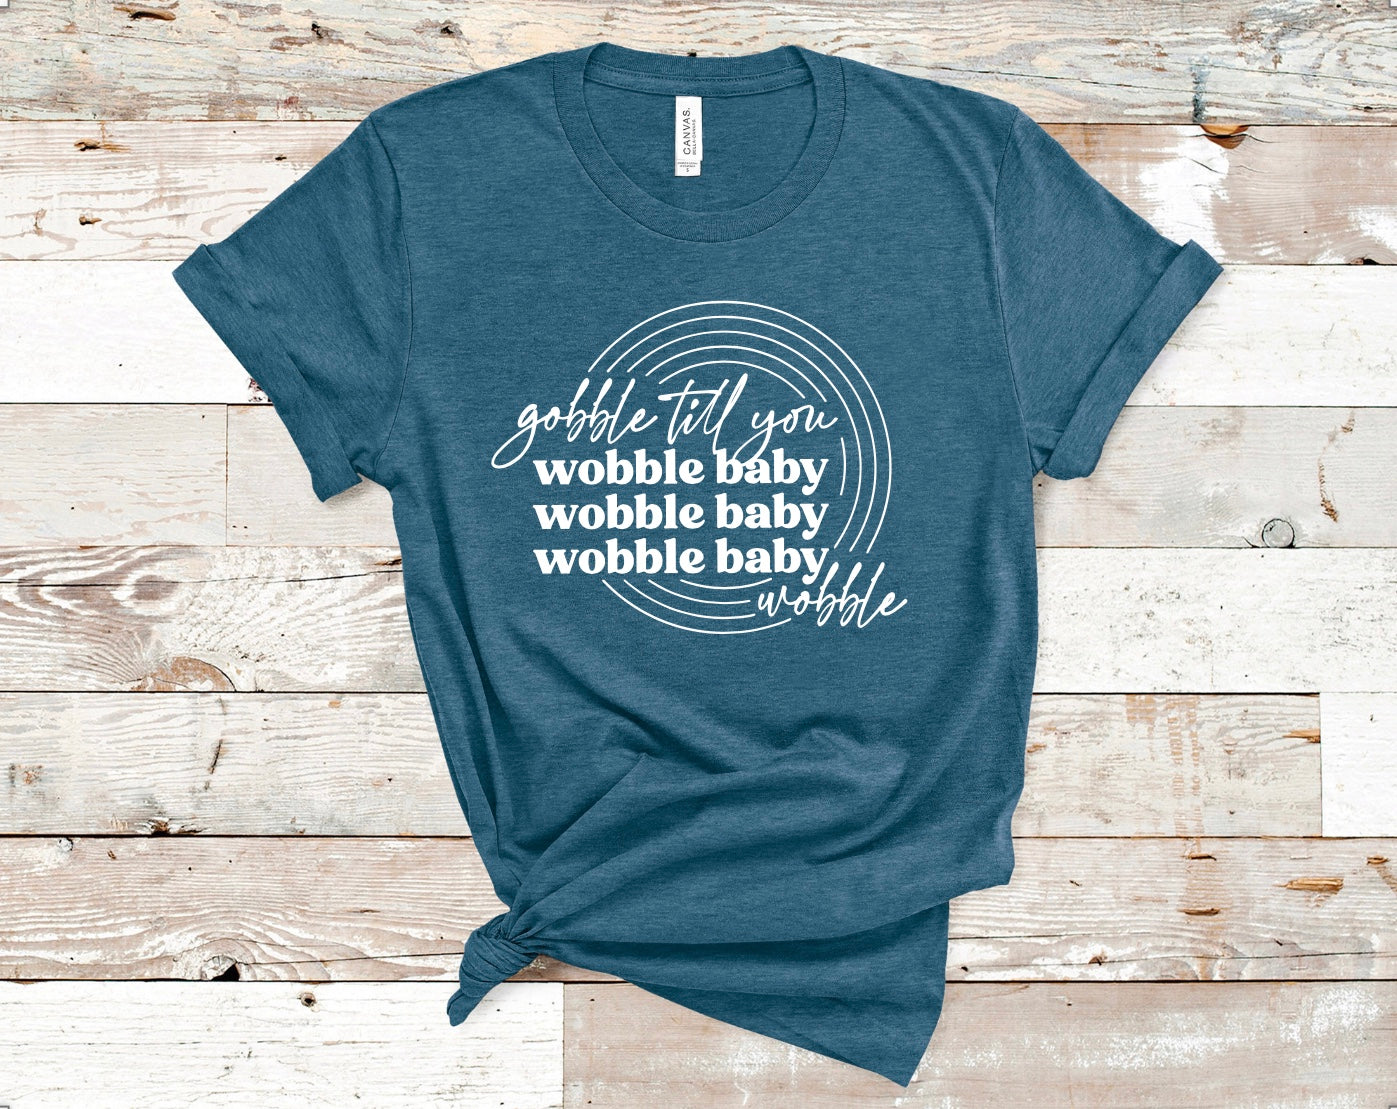 Gobble til you wobble baby | Thanksgiving t-shirt in heather deep teal